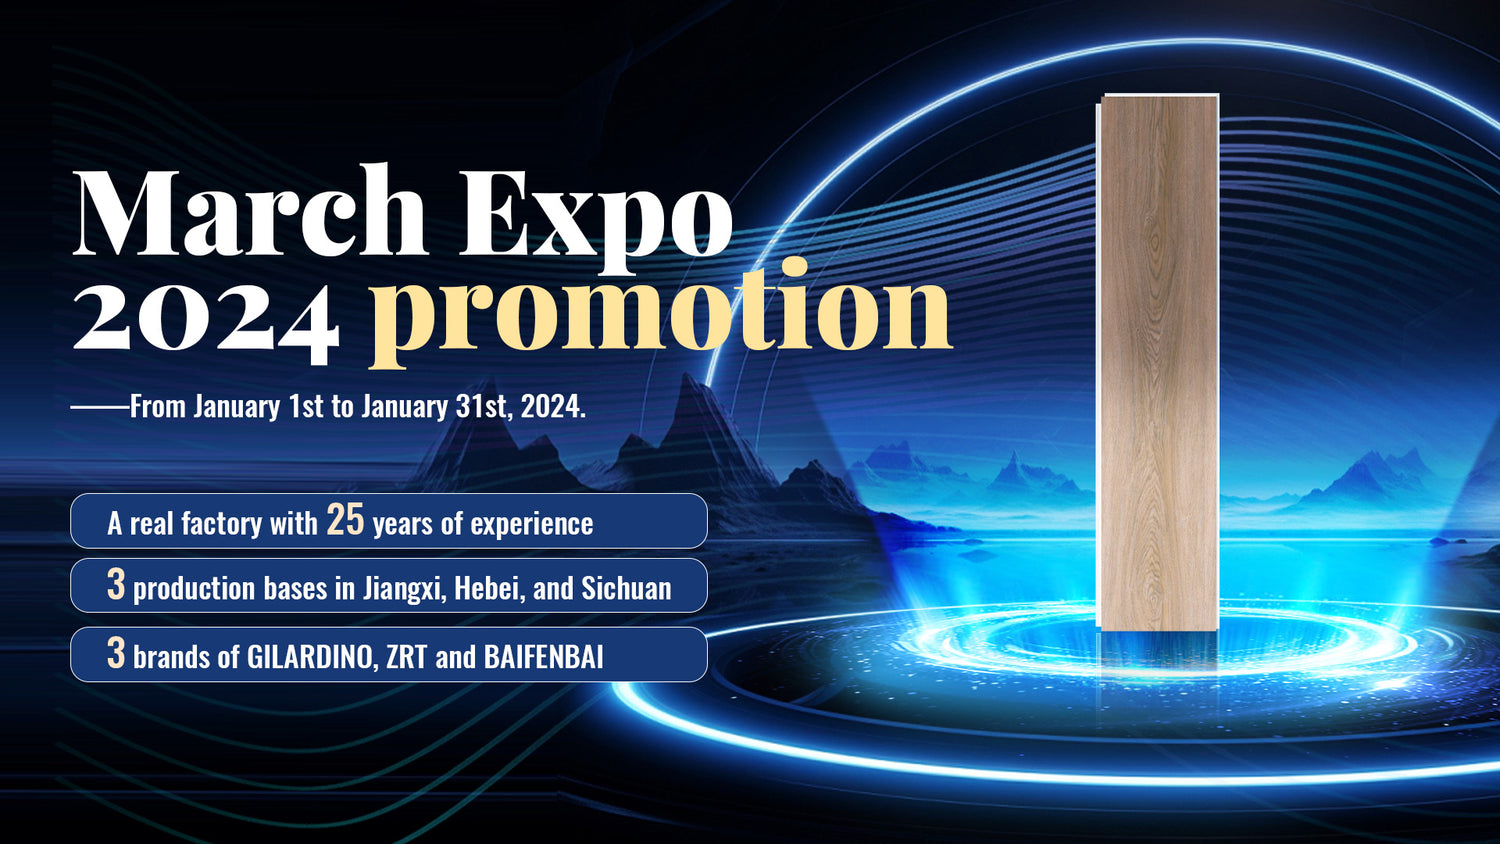 March Expo 2024 promotion